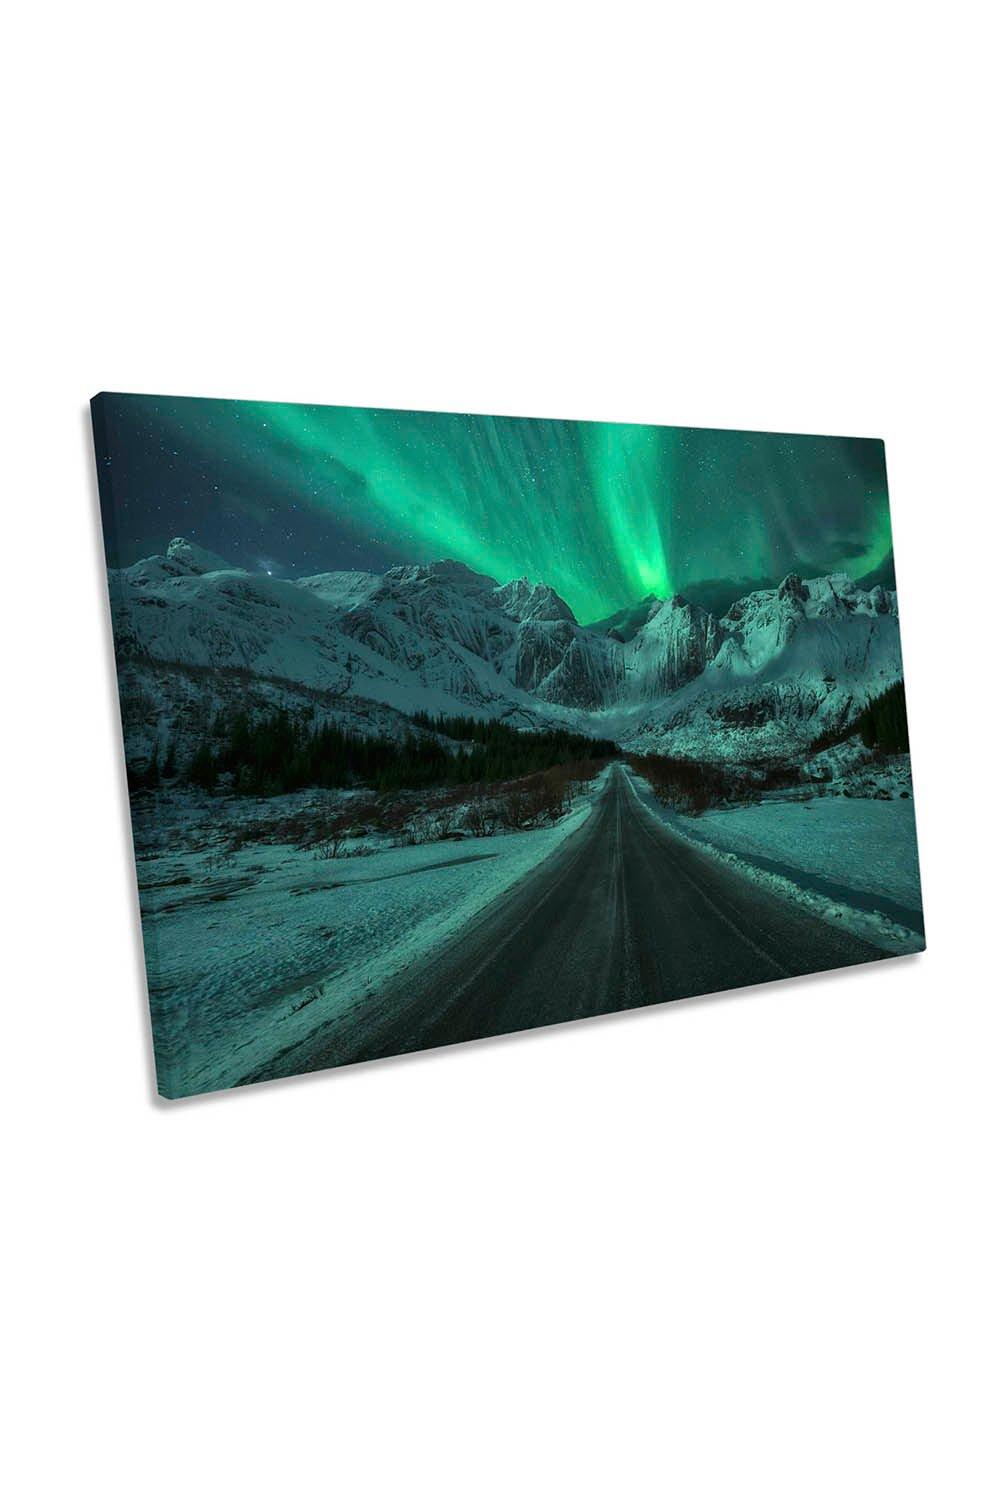 The Green Lady Northern Lights Snow Canvas Wall Art Picture Print